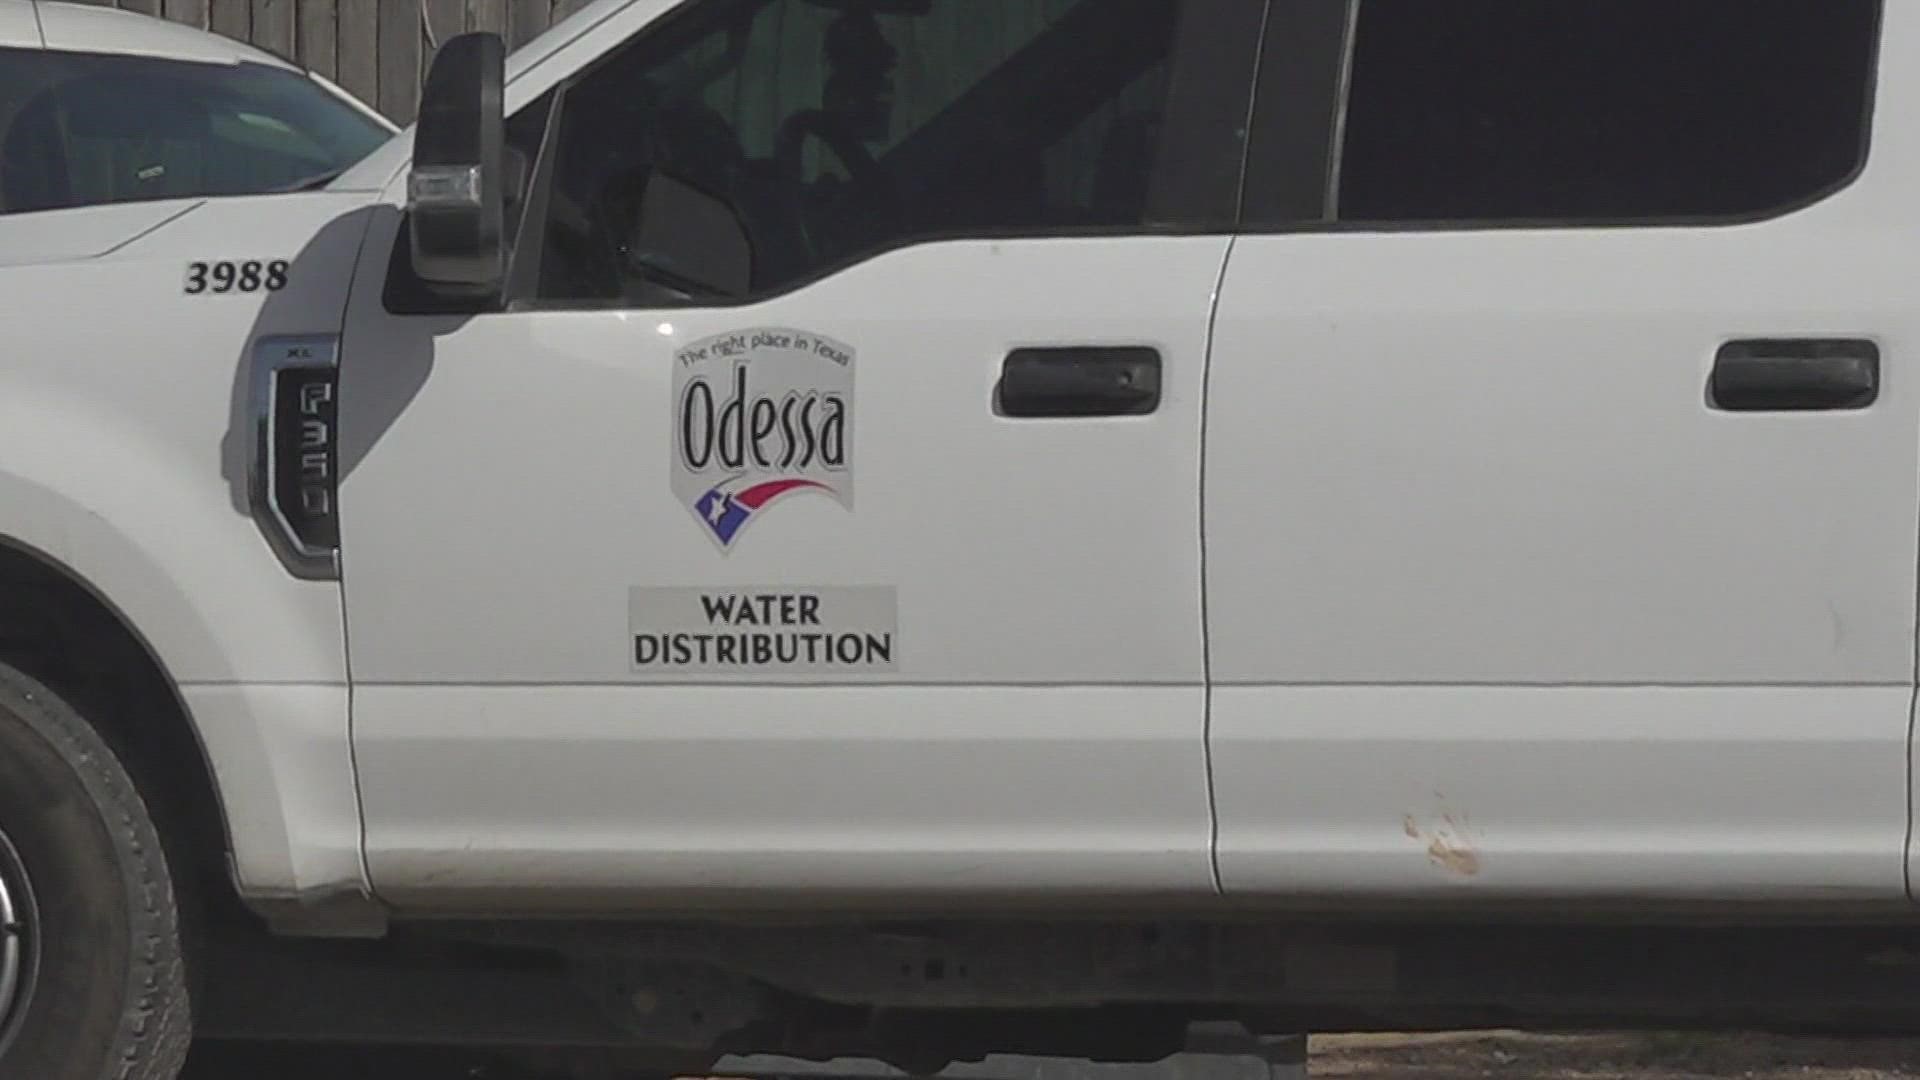 While the Ector County Utility District and the city of Odessa are right next to each other, they both have to send in water samples to be tested.